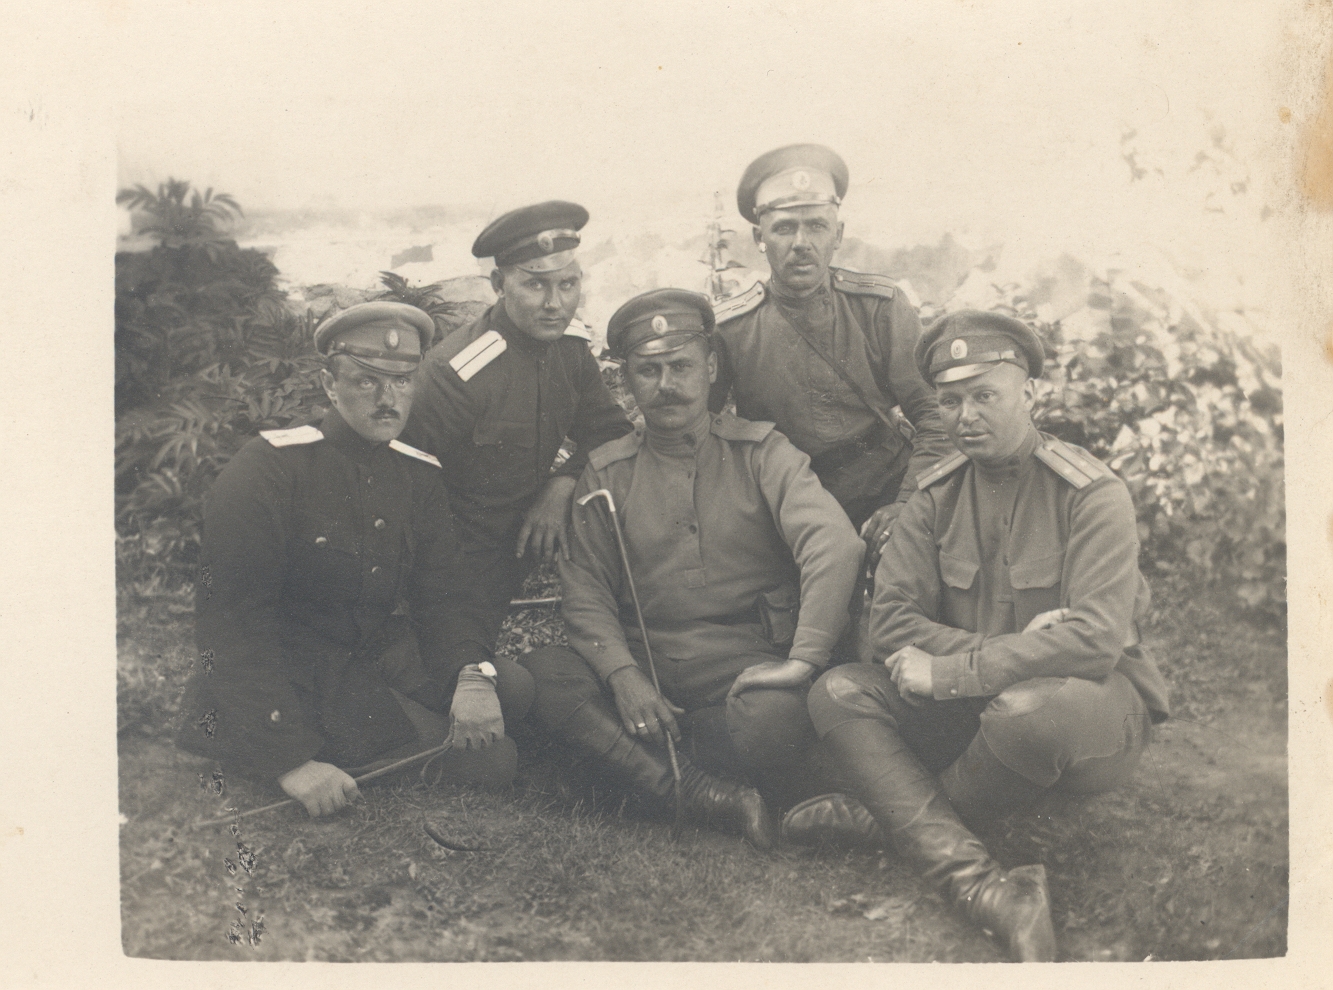 J. Vares-Barbarus with war partners in the days of World War I. 2nd row from left first